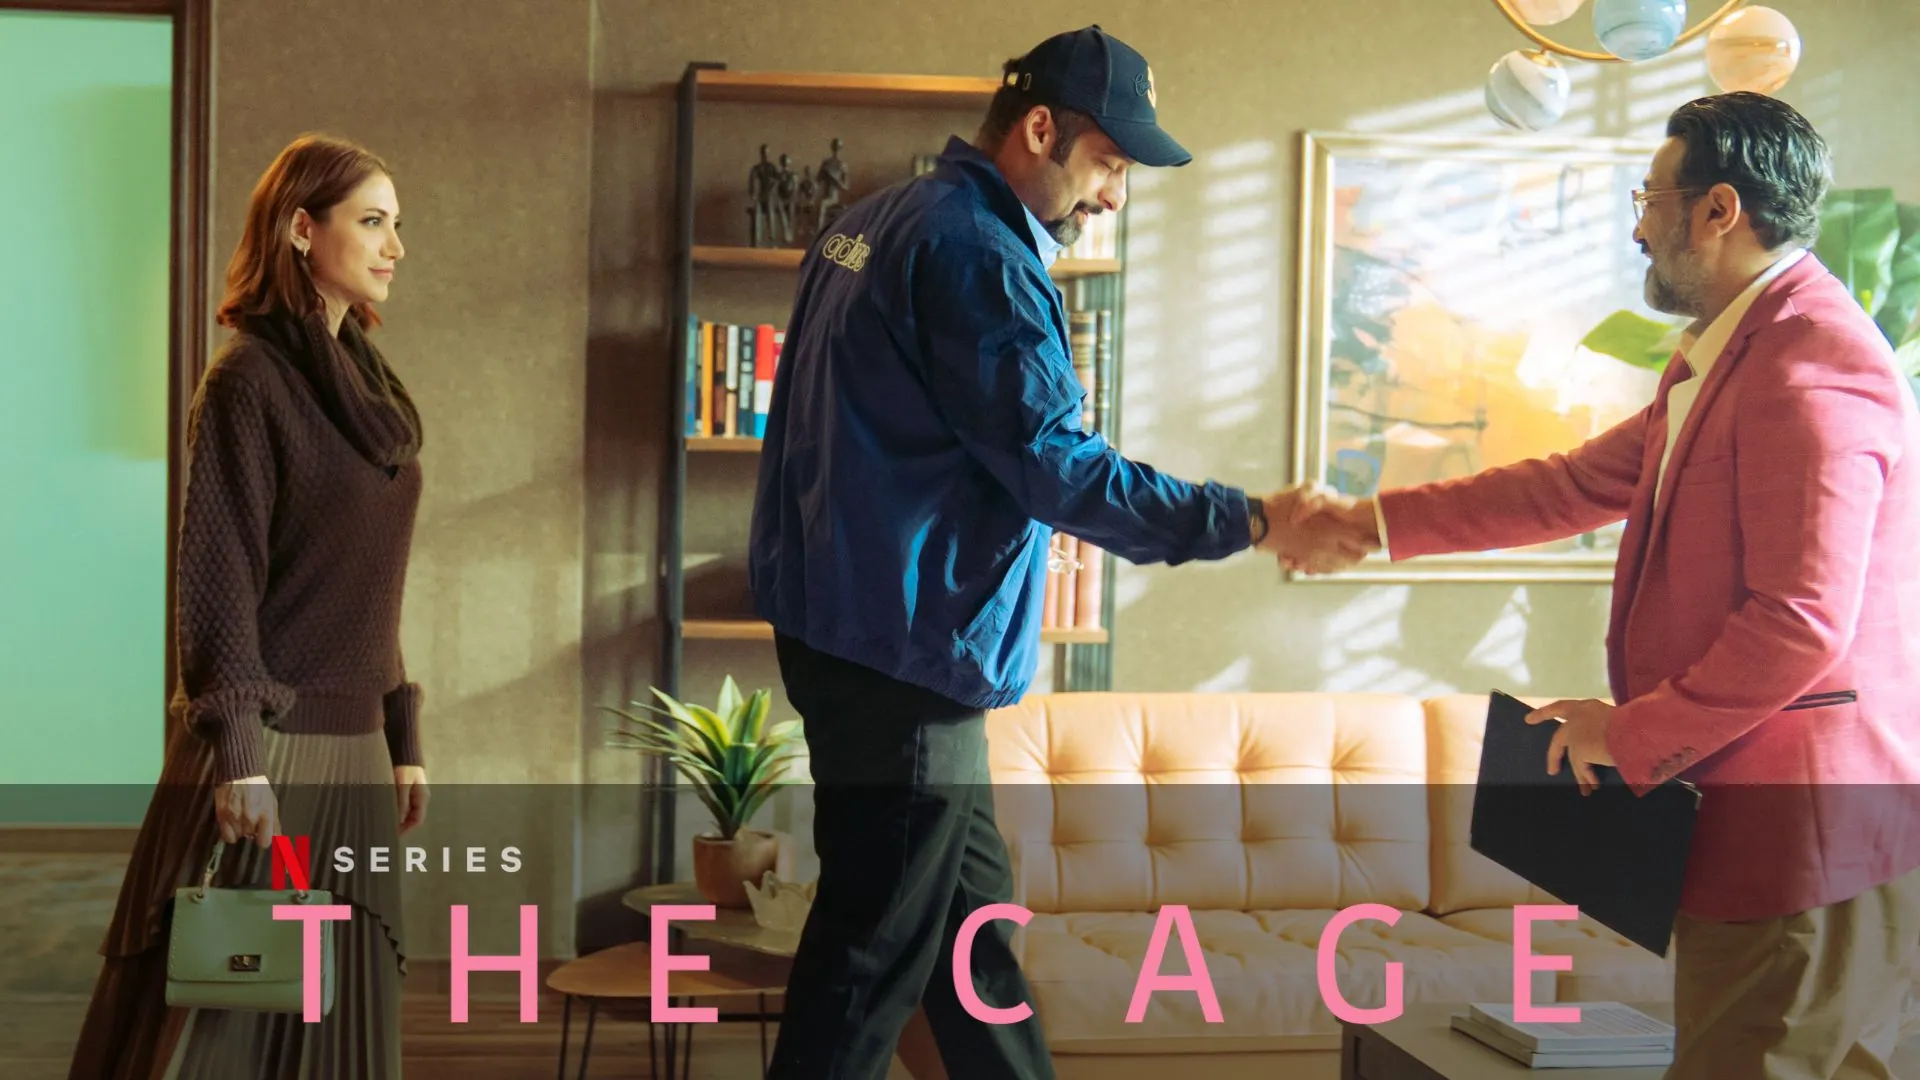  The Cage Tv Series 2022, Official Trailer, Release Date